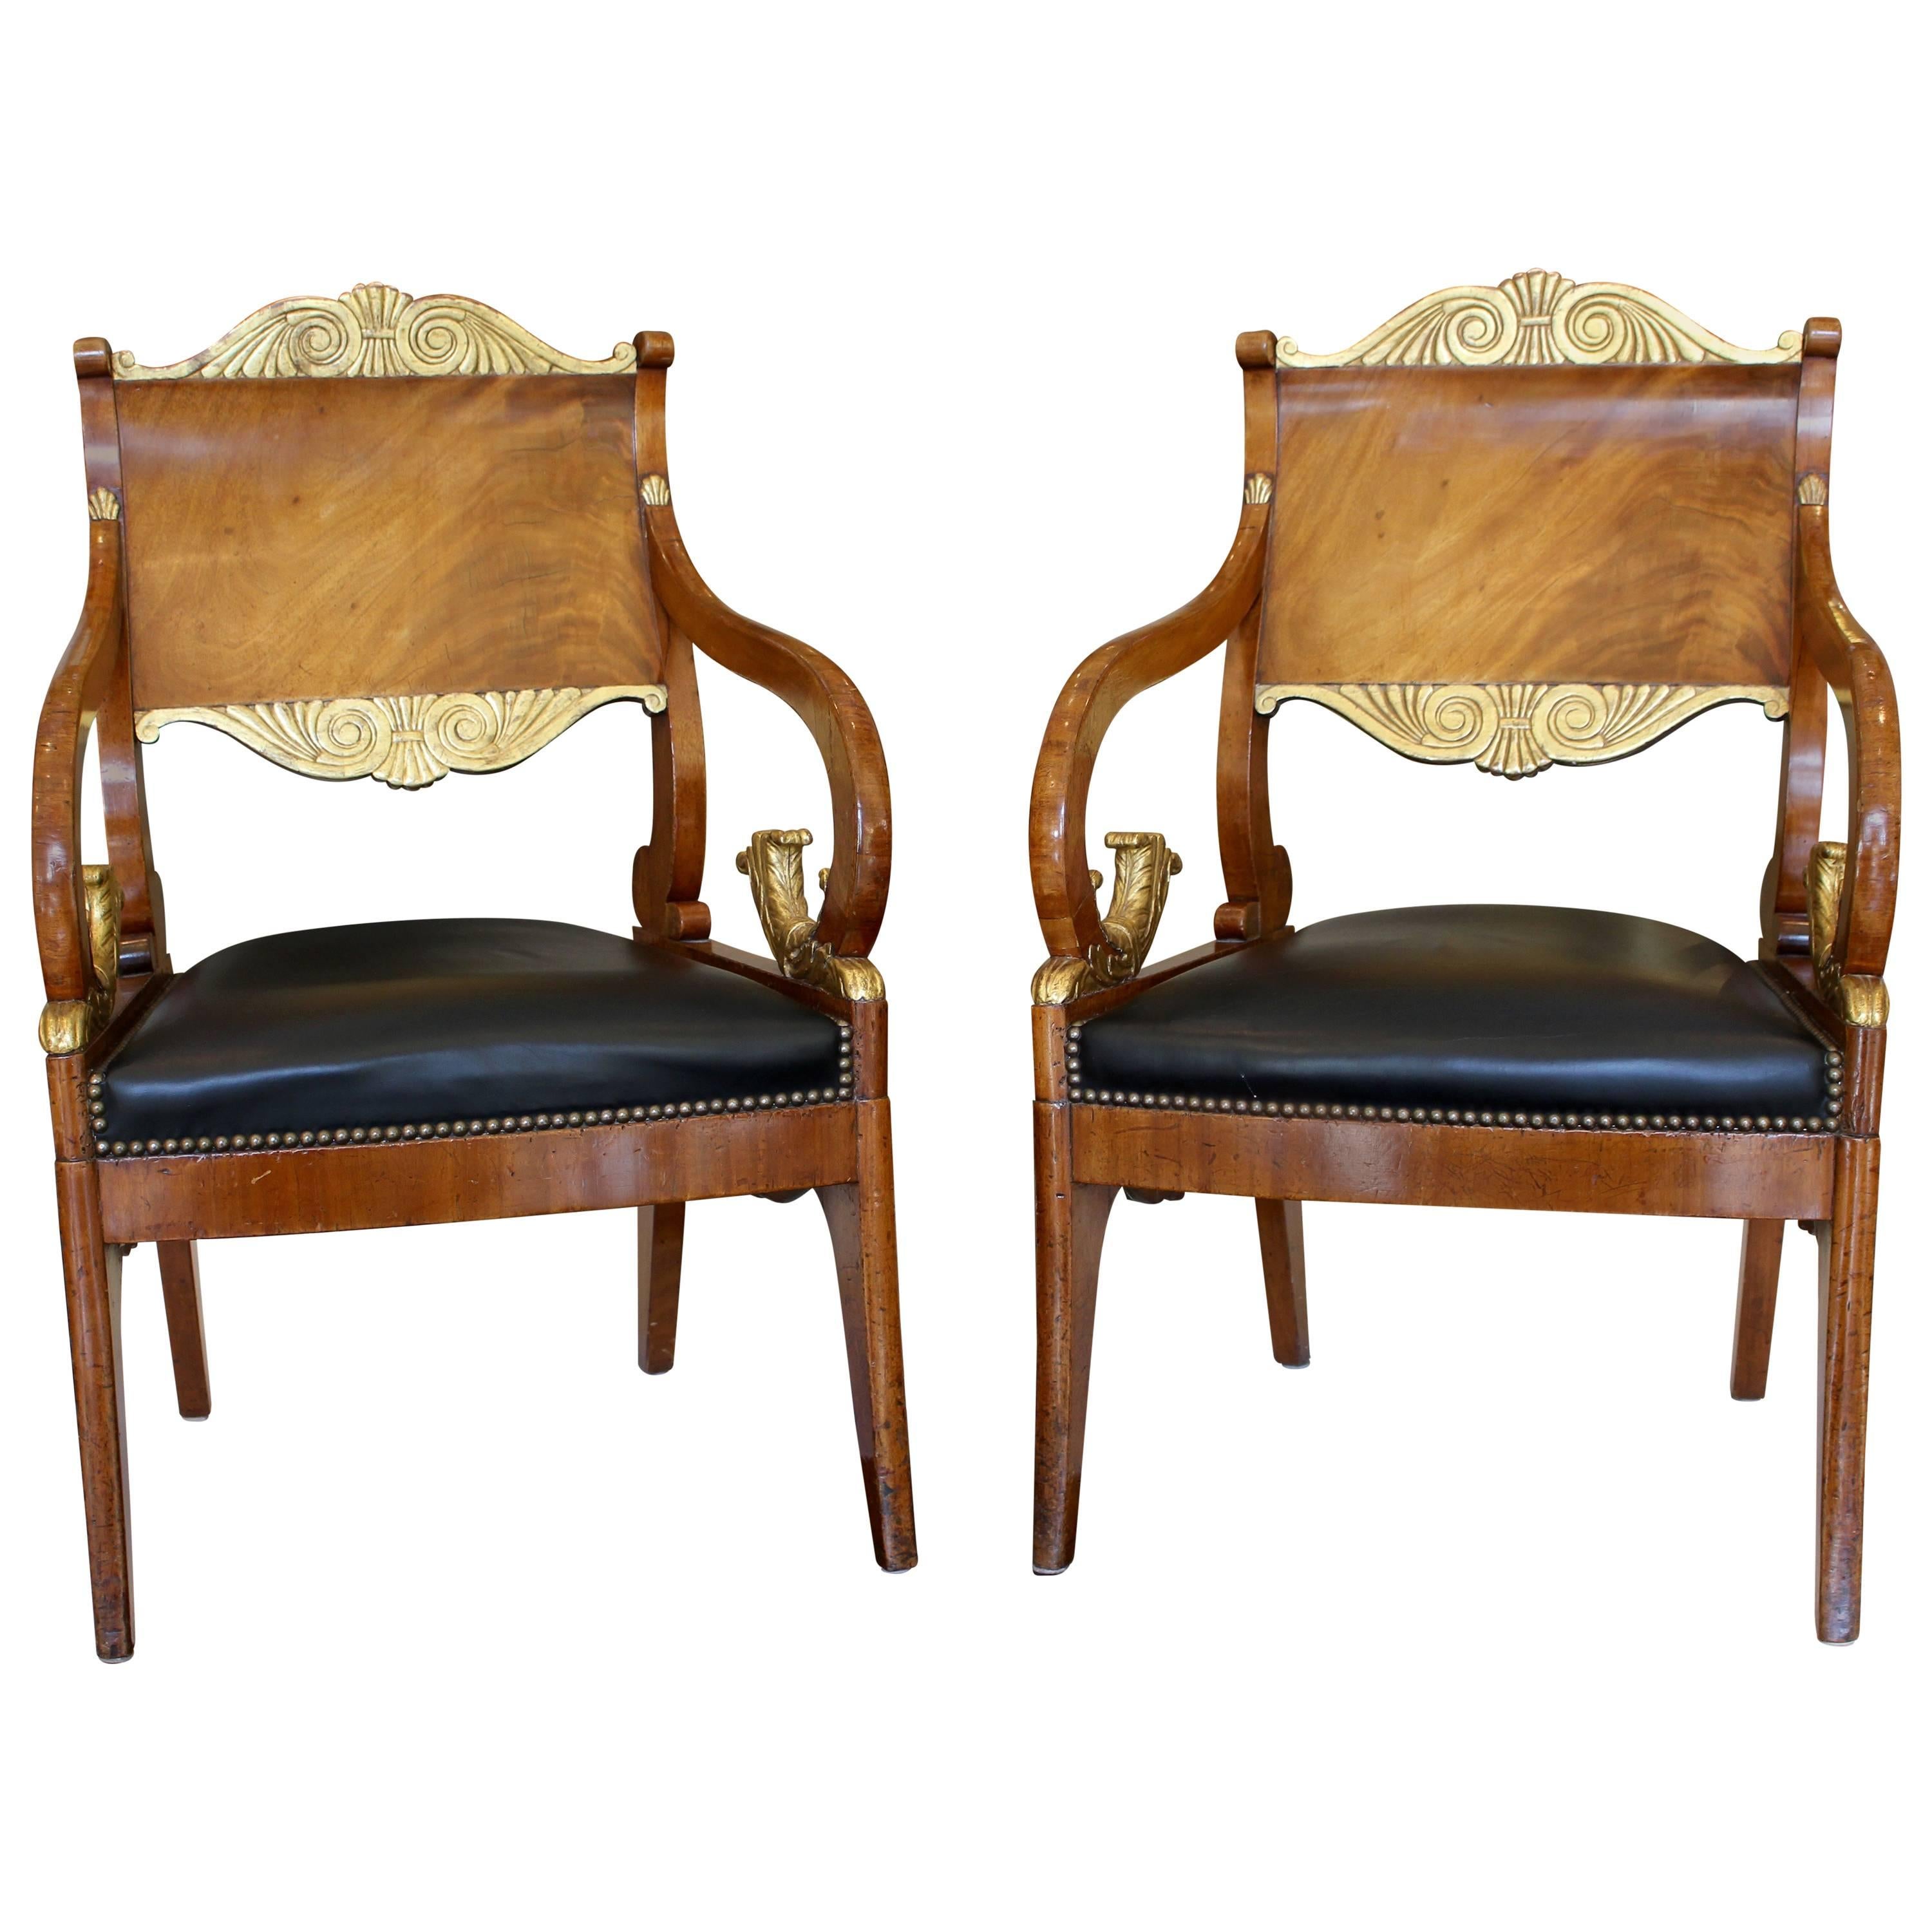 Pair of 18th Century Russian Neoclassical Period Mahogany Parcel-Gilt Armchairs For Sale